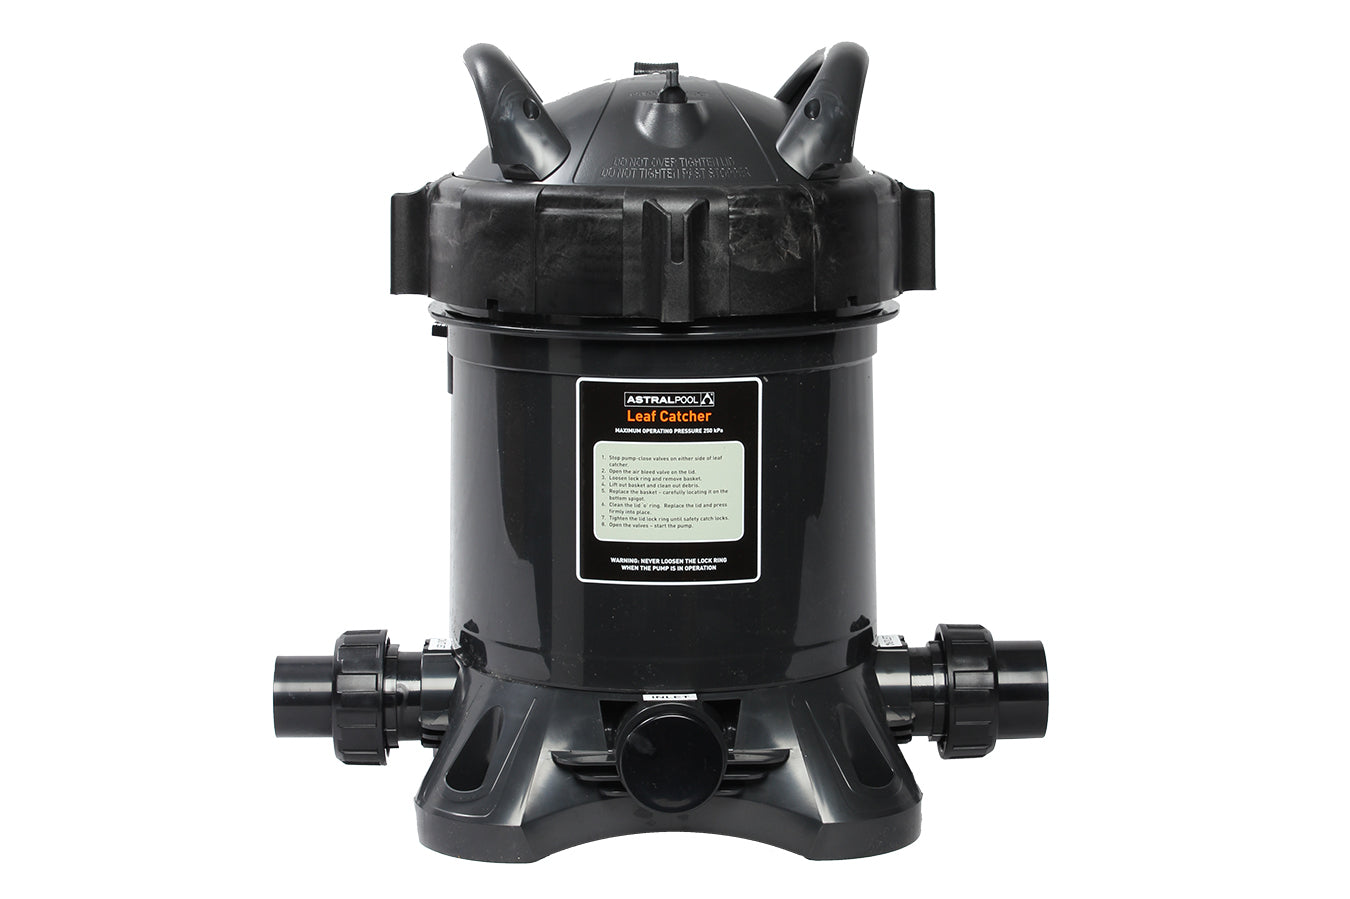 AstralPool IX 50 In-Line Leaf Canister